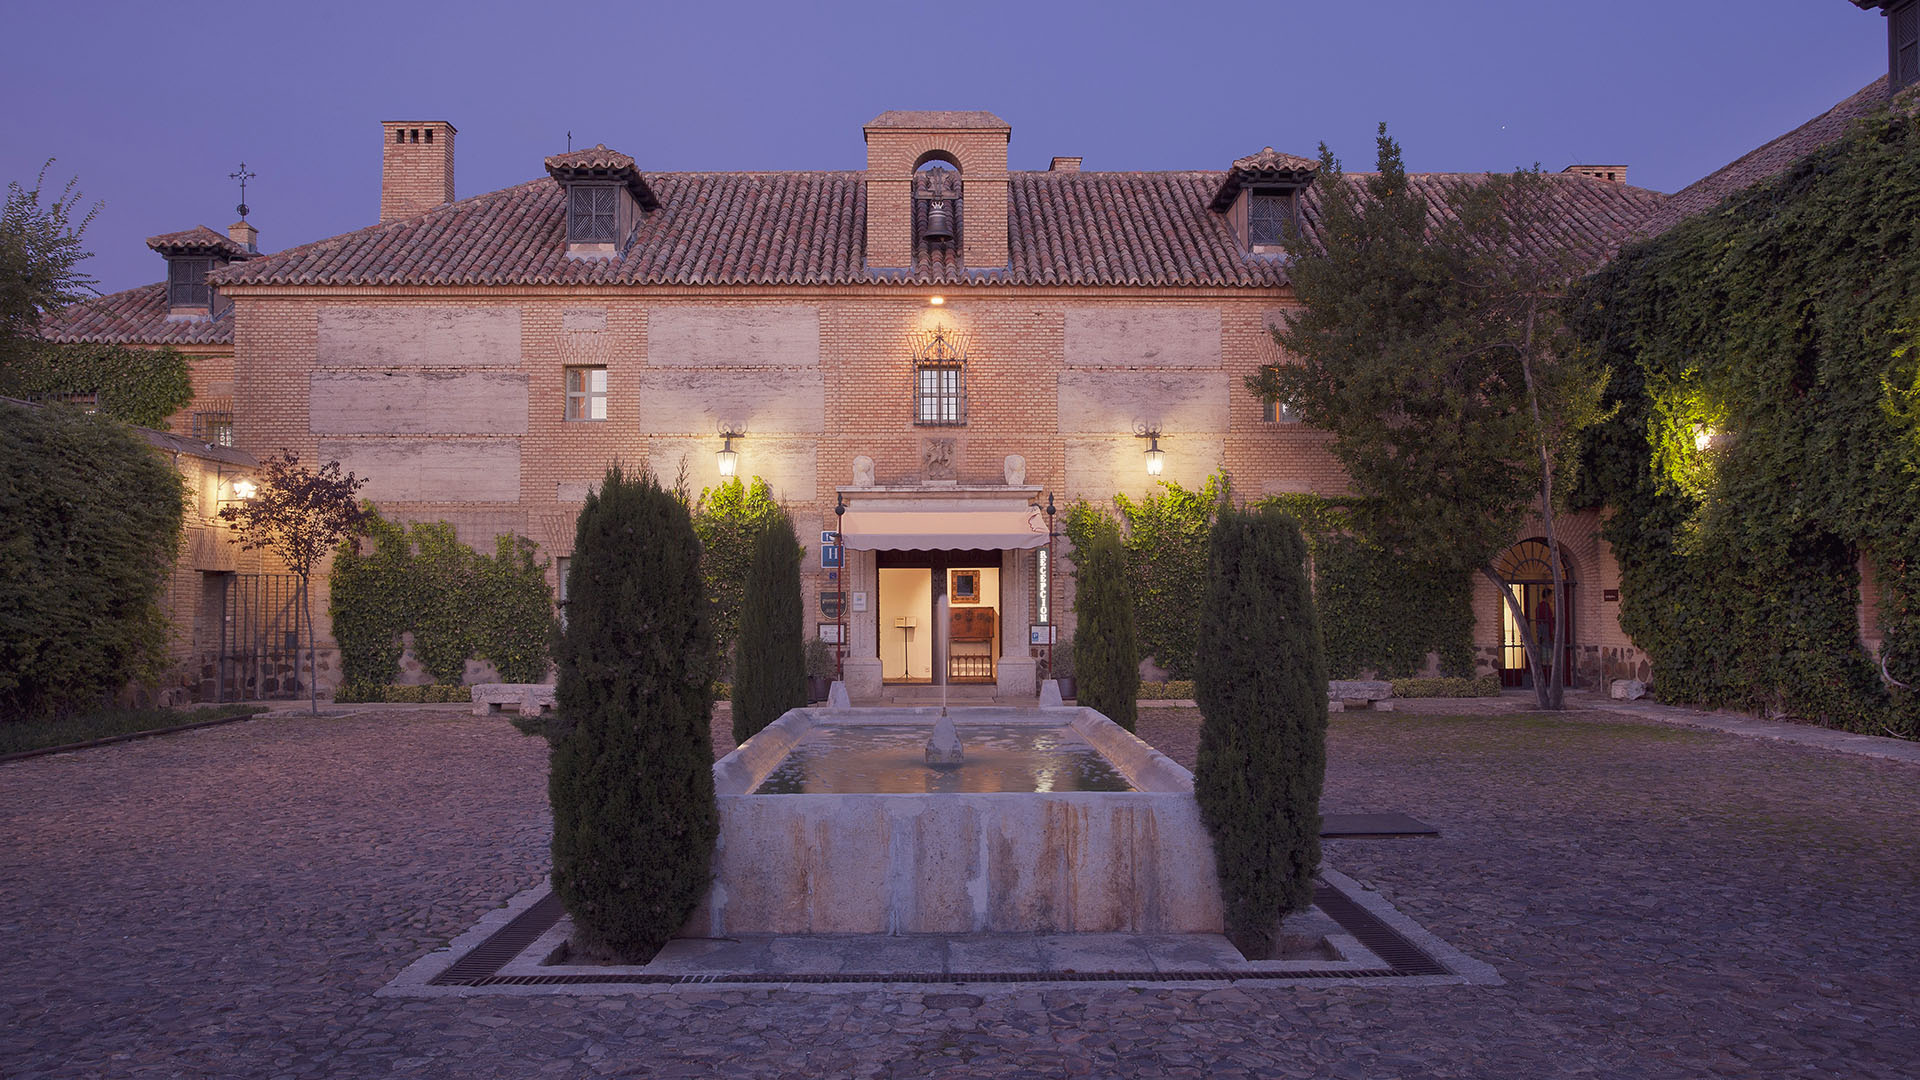 Stay in the Paradores of the Most Beautiful Towns in Spain